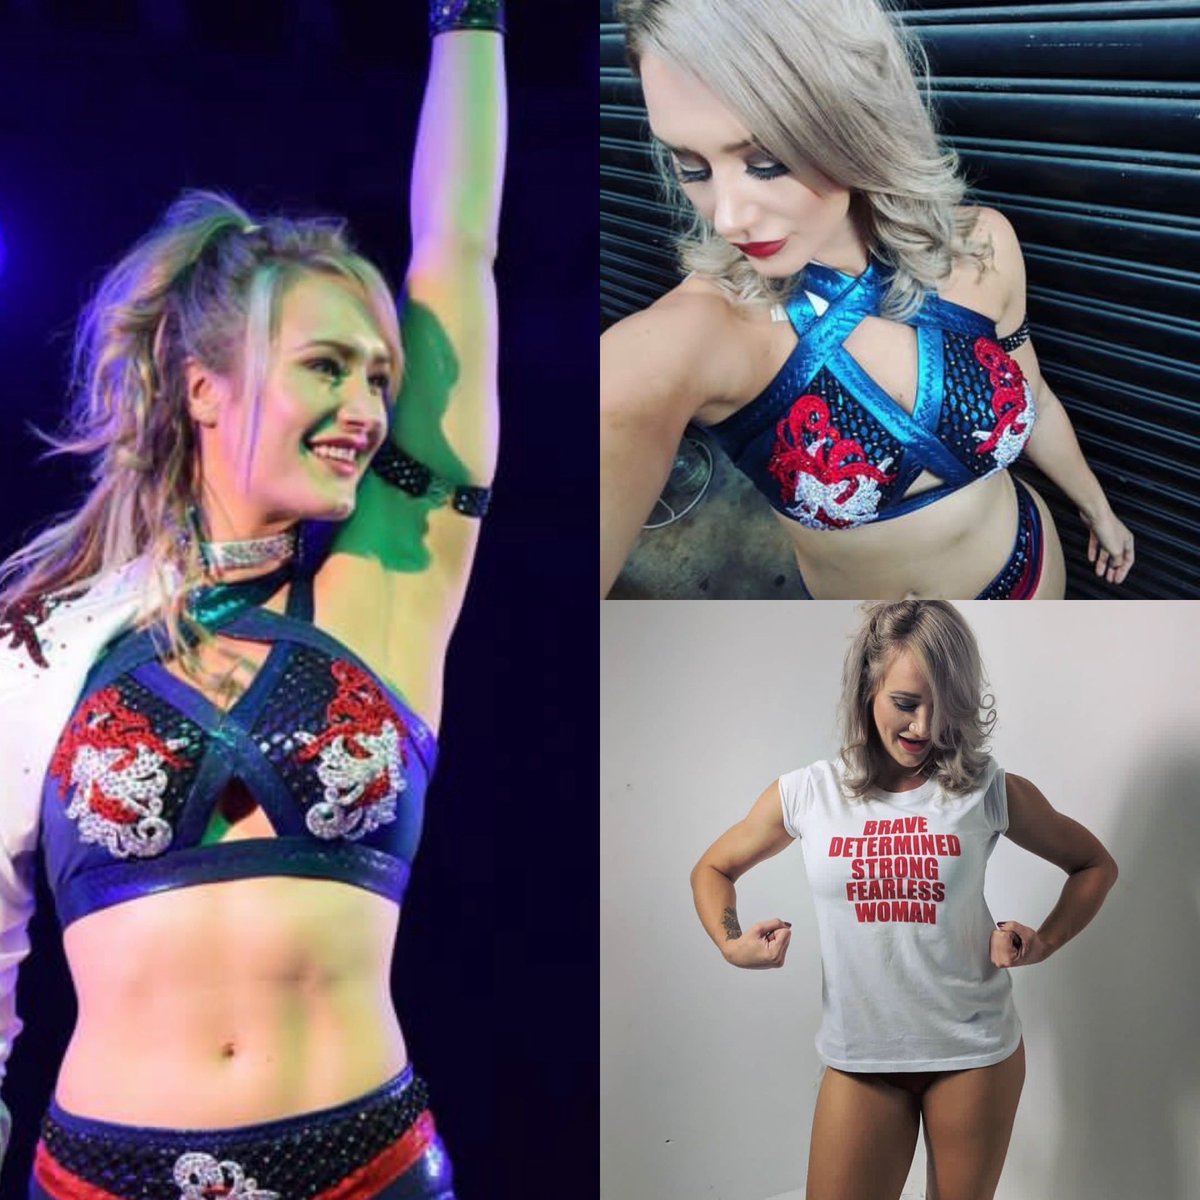 Remember You can only see Chardonnay at Powergirls pro so
Send your wrestling scripts to powergirlspro@hotmail.com🥰 #womenswrestlers #customwrestling #wrestlinggirl #wrestlinggirls #mixedwrestling_ #piledriver #piledrivers